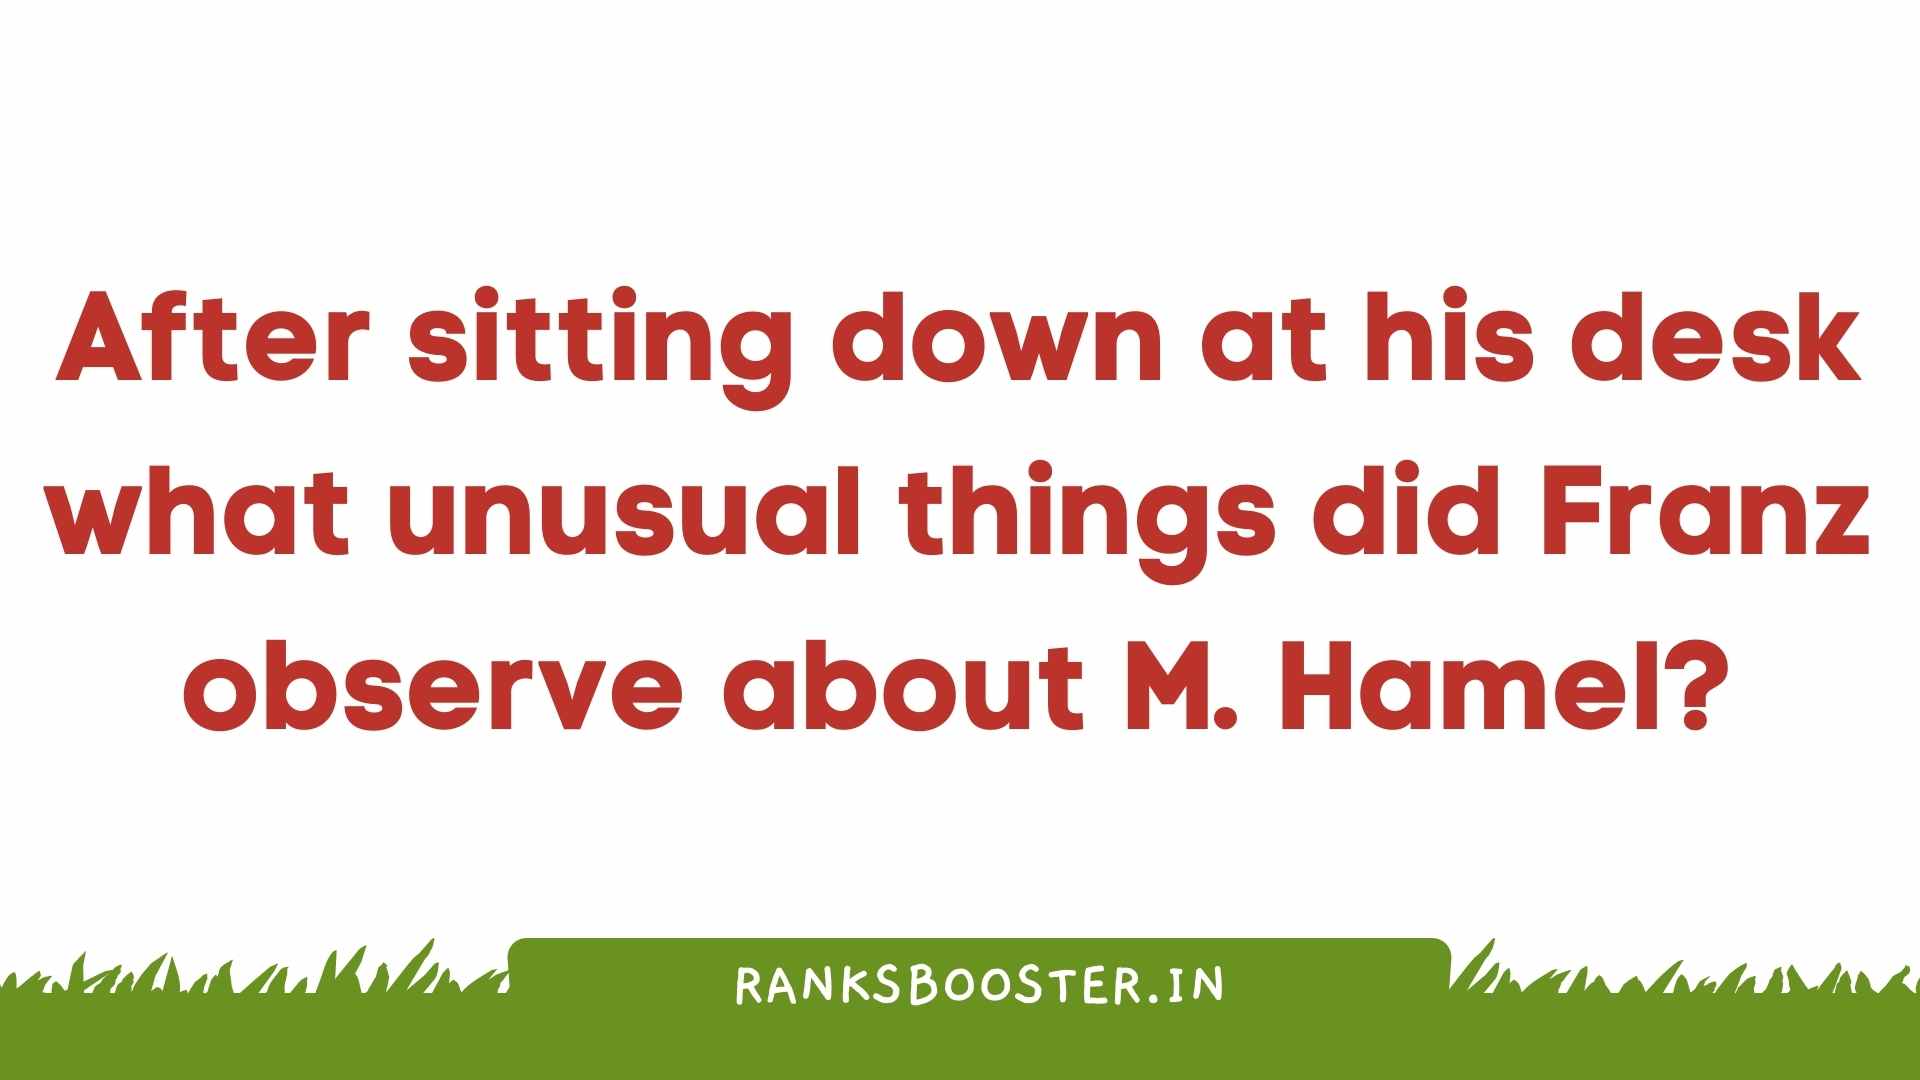 After sitting down at his desk what unusual things did Franz observe about M. Hamel?